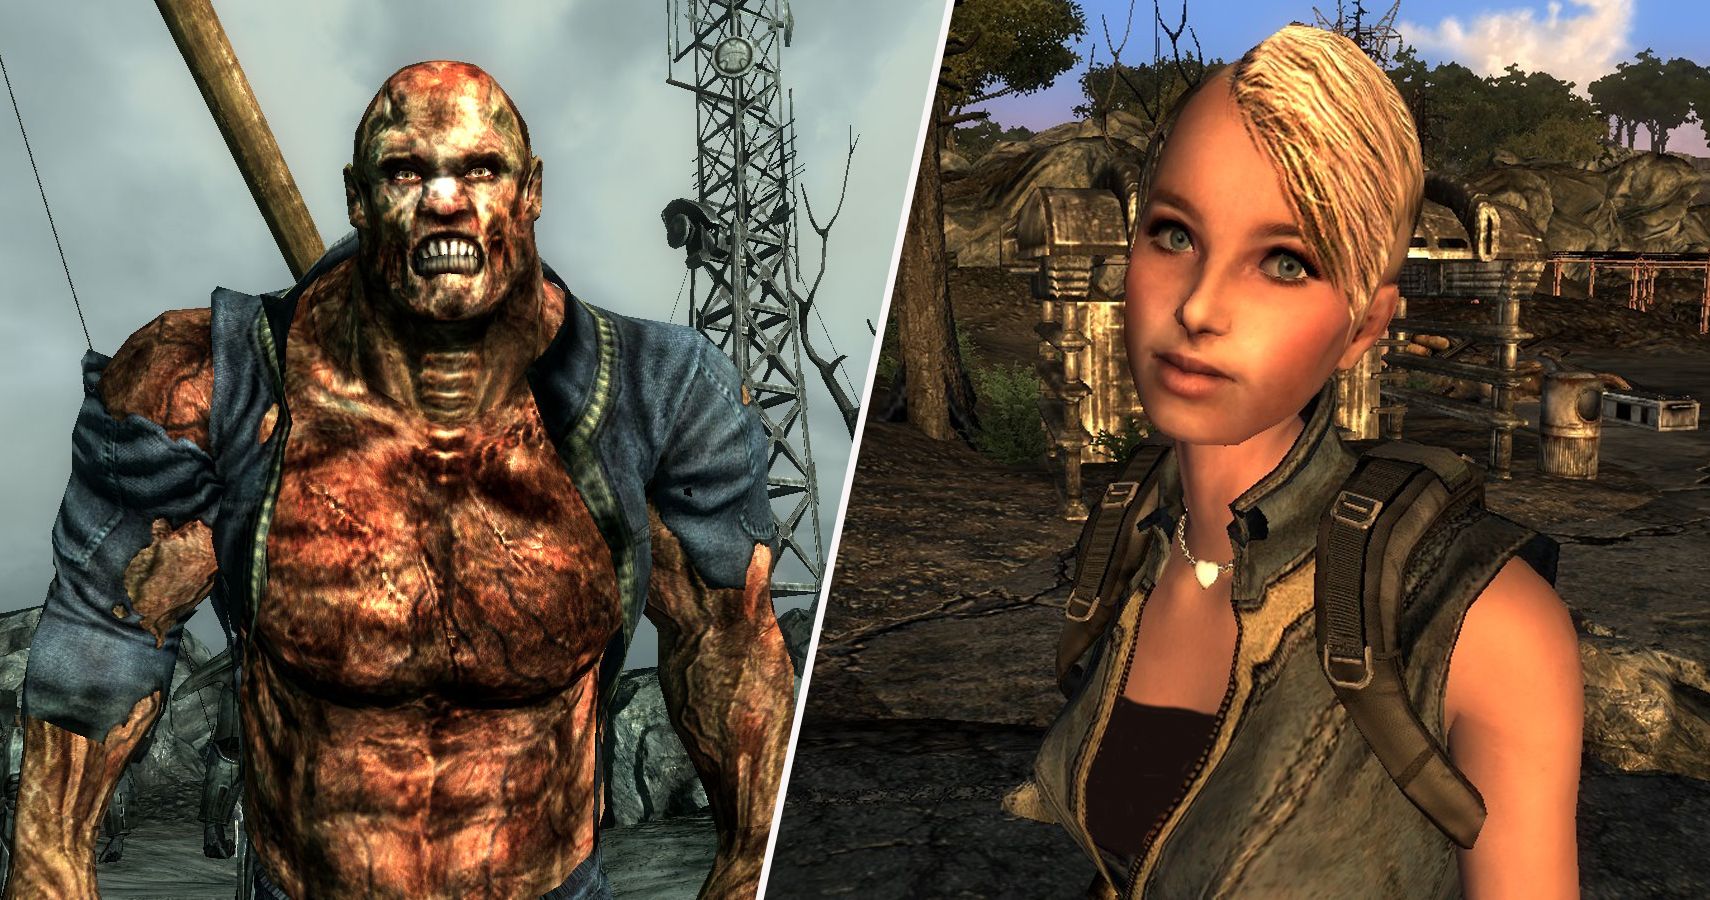 fallout 3 companions die